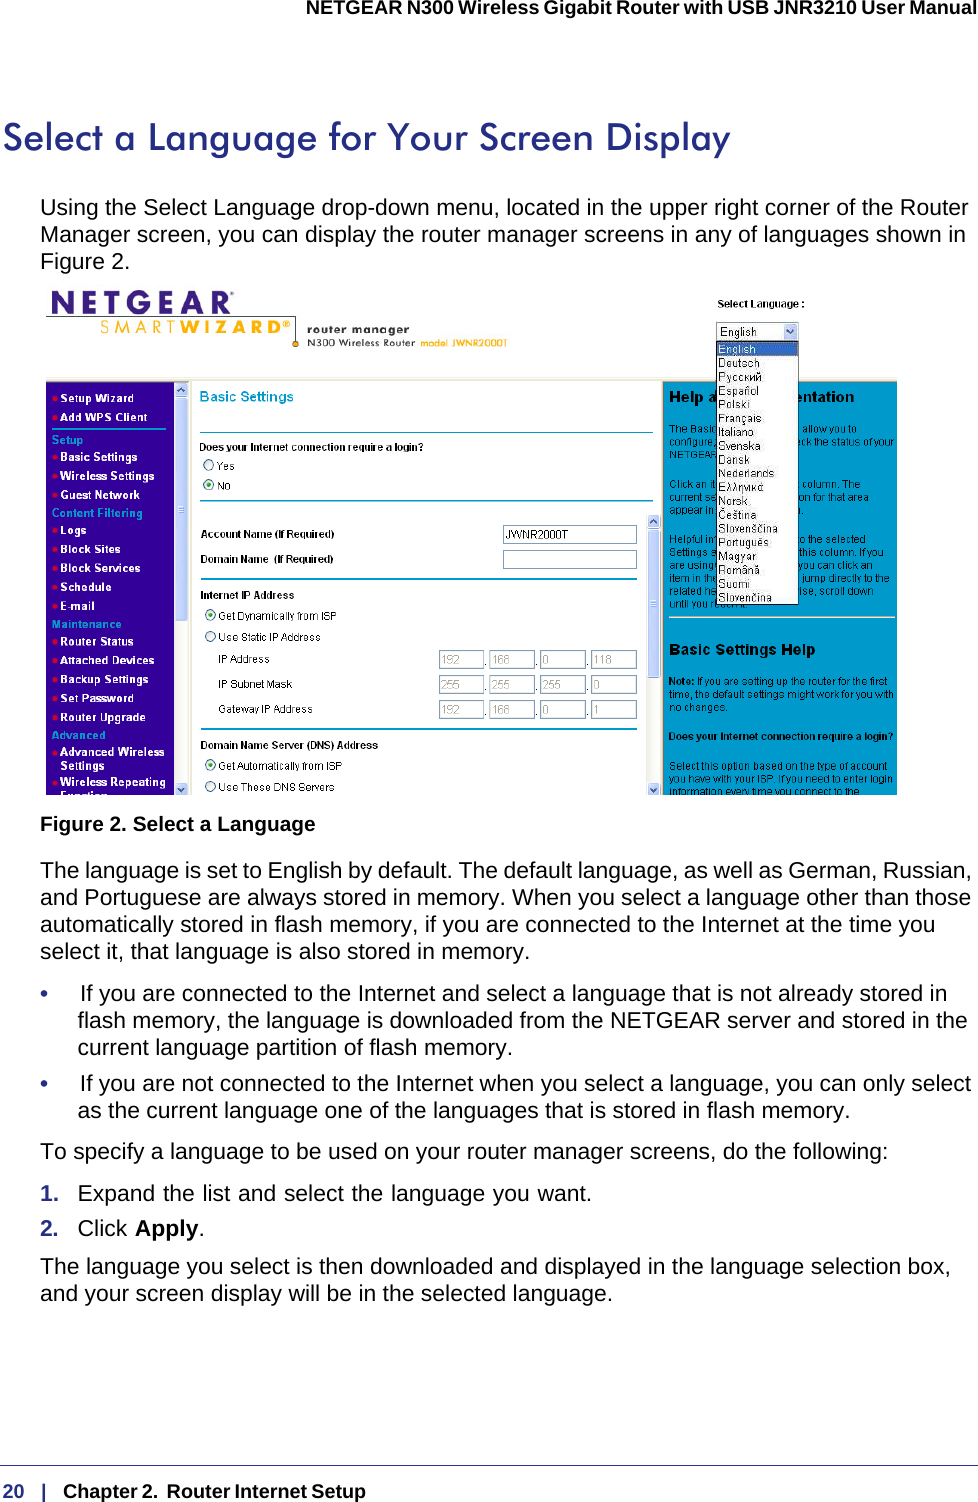 20   |   Chapter 2.  Router Internet Setup  NETGEAR N300 Wireless Gigabit Router with USB JNR3210 User Manual Select a Language for Your Screen DisplayUsing the Select Language drop-down menu, located in the upper right corner of the Router Manager screen, you can display the router manager screens in any of languages shown in Figure 2.Figure 2. Select a LanguageThe language is set to English by default. The default language, as well as German, Russian, and Portuguese are always stored in memory. When you select a language other than those automatically stored in flash memory, if you are connected to the Internet at the time you select it, that language is also stored in memory. •     If you are connected to the Internet and select a language that is not already stored in flash memory, the language is downloaded from the NETGEAR server and stored in the current language partition of flash memory. •     If you are not connected to the Internet when you select a language, you can only select as the current language one of the languages that is stored in flash memory.To specify a language to be used on your router manager screens, do the following:1.  Expand the list and select the language you want. 2.  Click Apply.The language you select is then downloaded and displayed in the language selection box, and your screen display will be in the selected language.